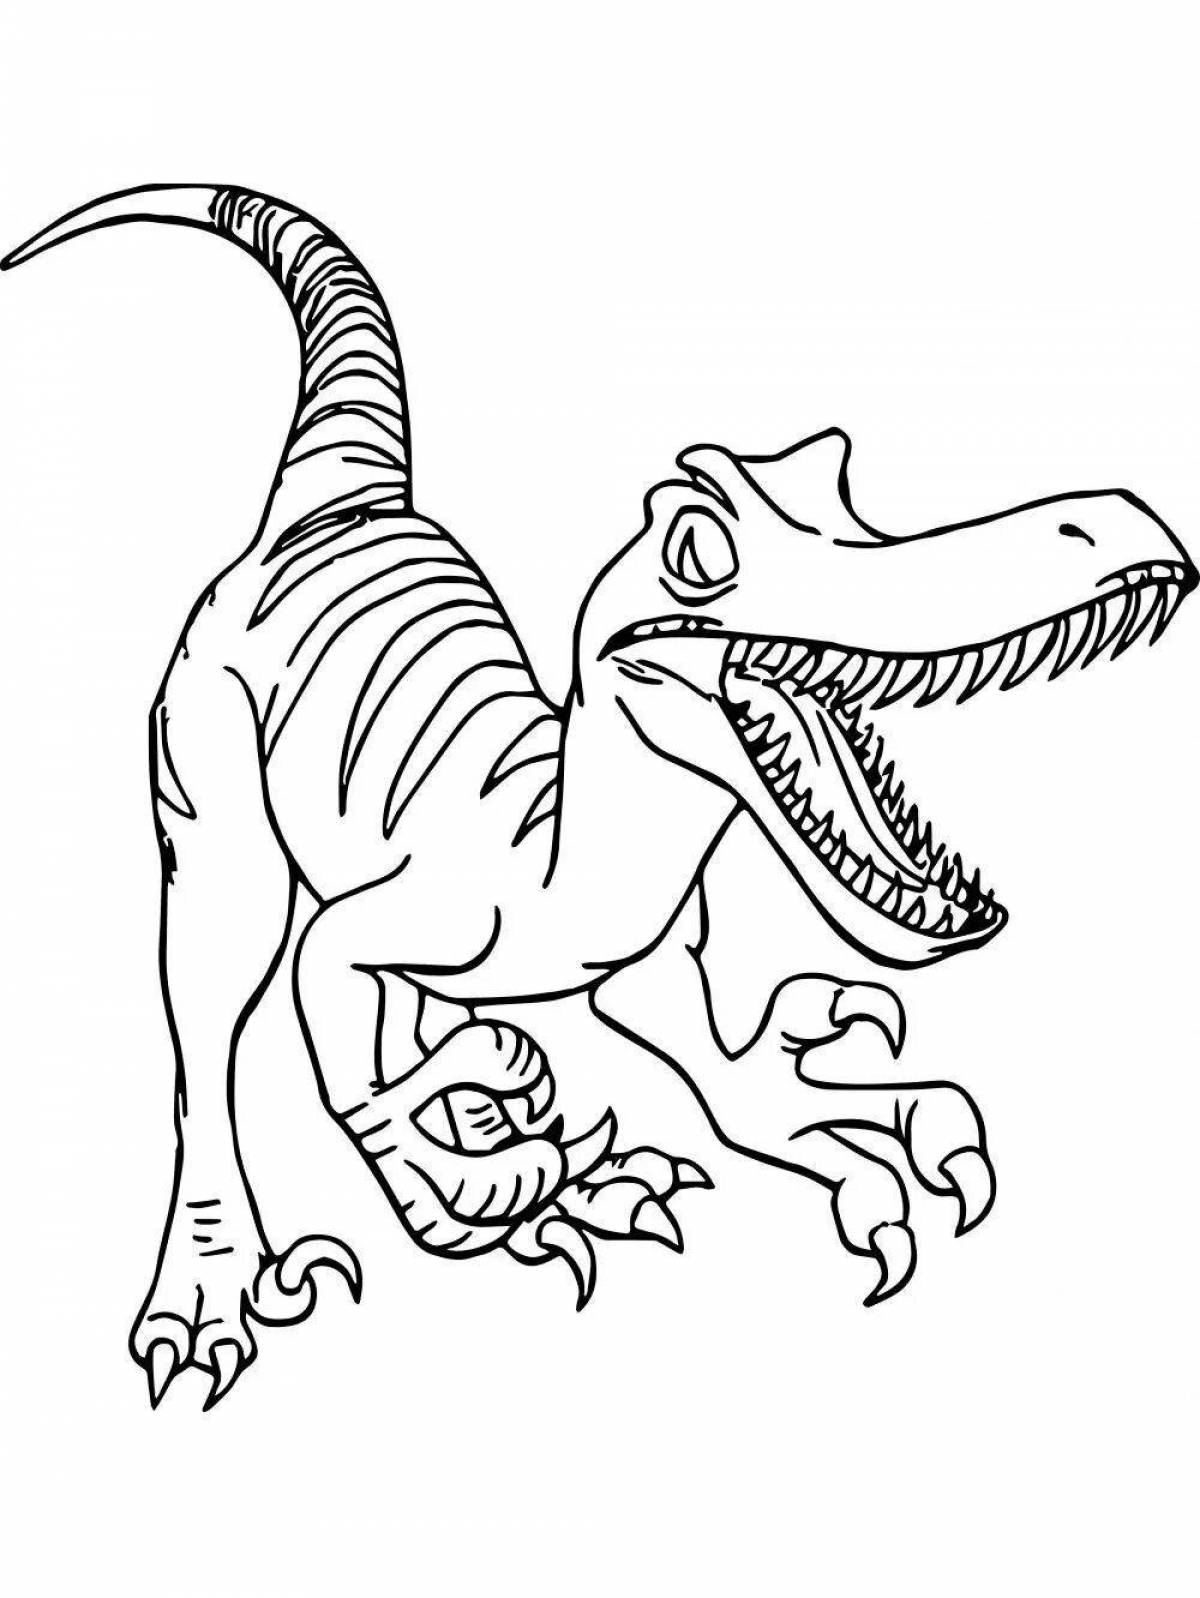 Awesome dinosaur coloring pages